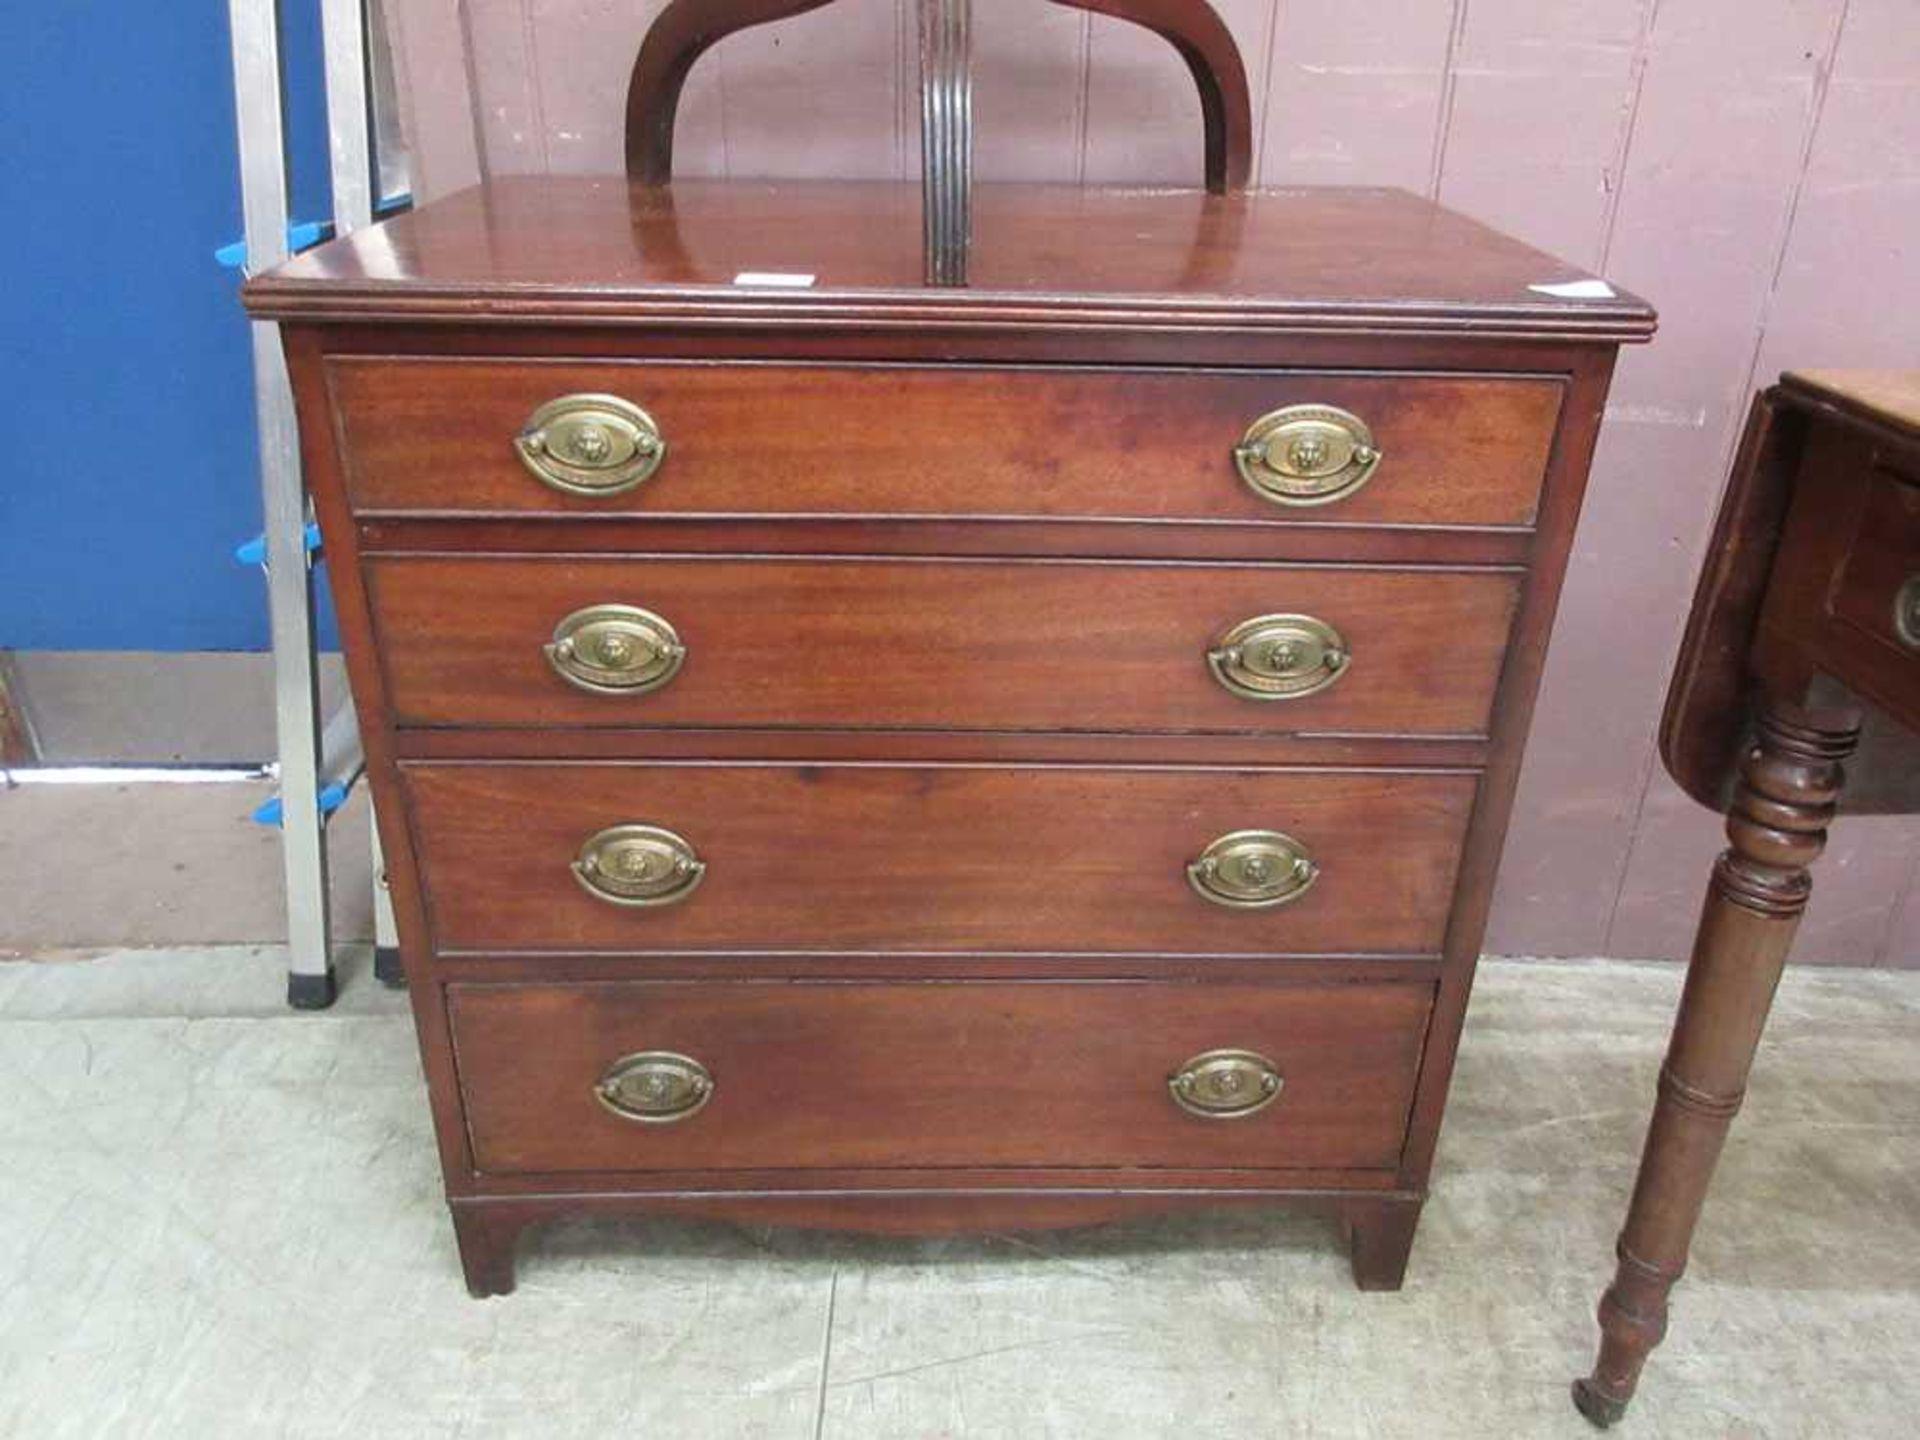 An early 20th century mahogany chest of four drawers